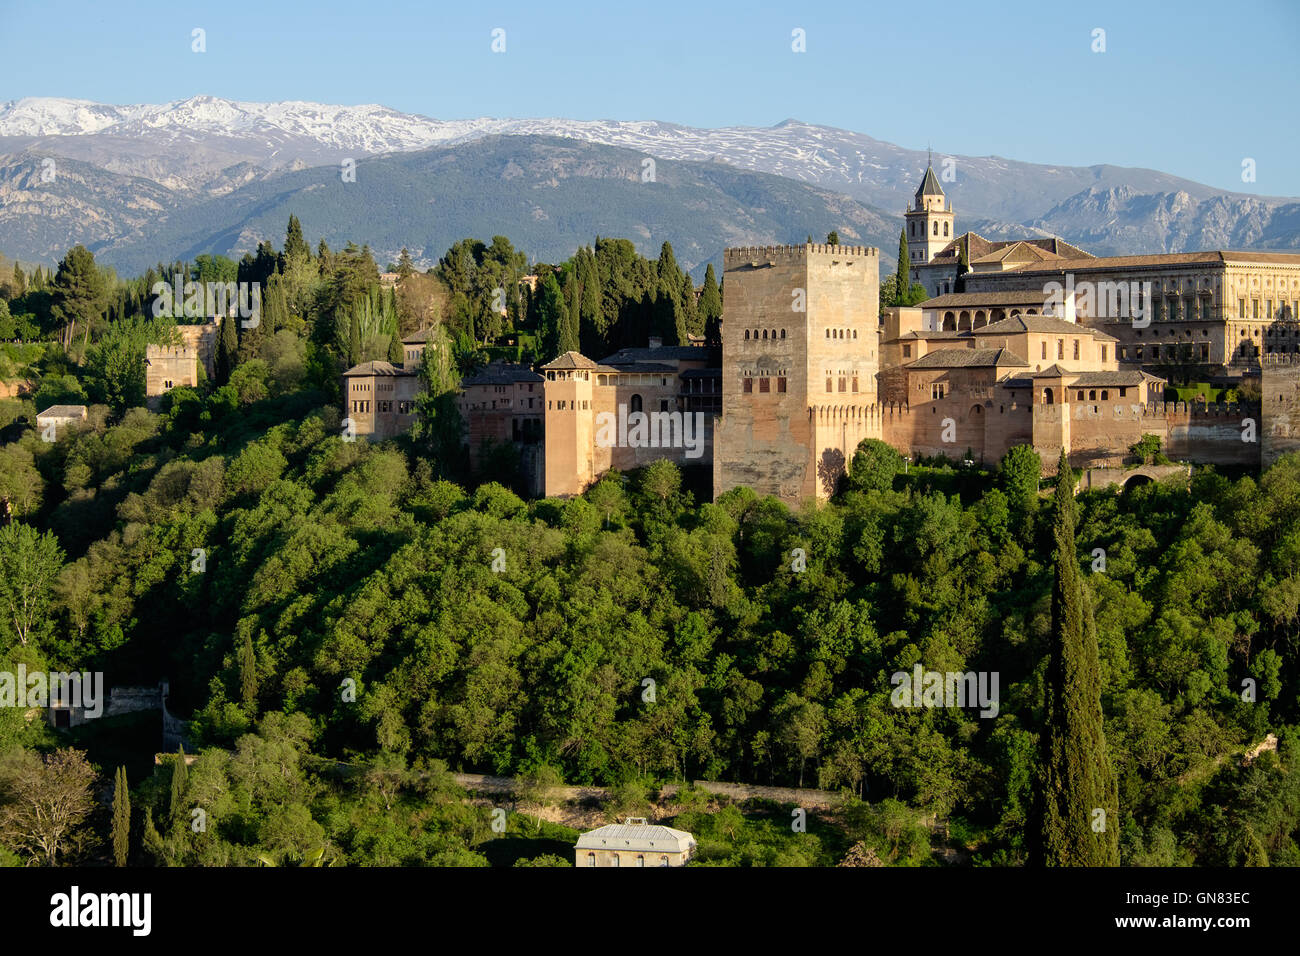 The Alhambra Palace, Granada, Spain with the Sierra Nevada mountains in the background Stock Photo